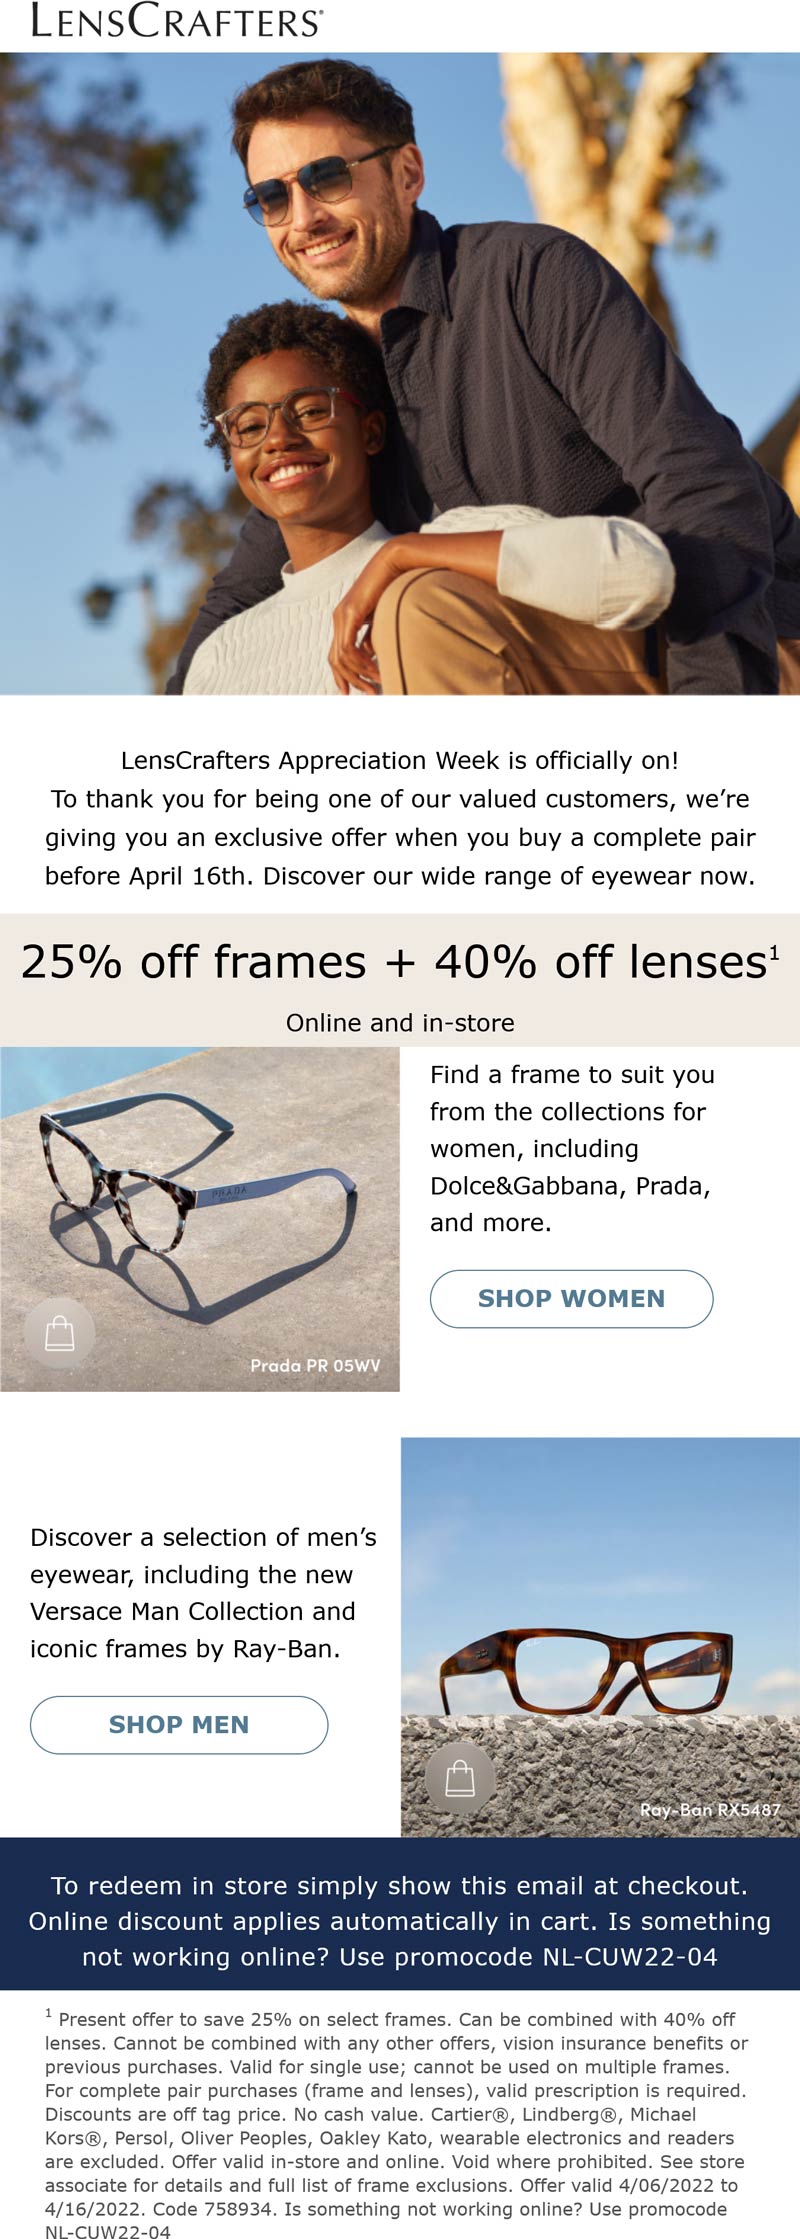 Lenscrafters stores Coupon  25% off frames & 40% off lenses at Lenscrafters, or online via promo code NL-CUW22-04 #lenscrafters 